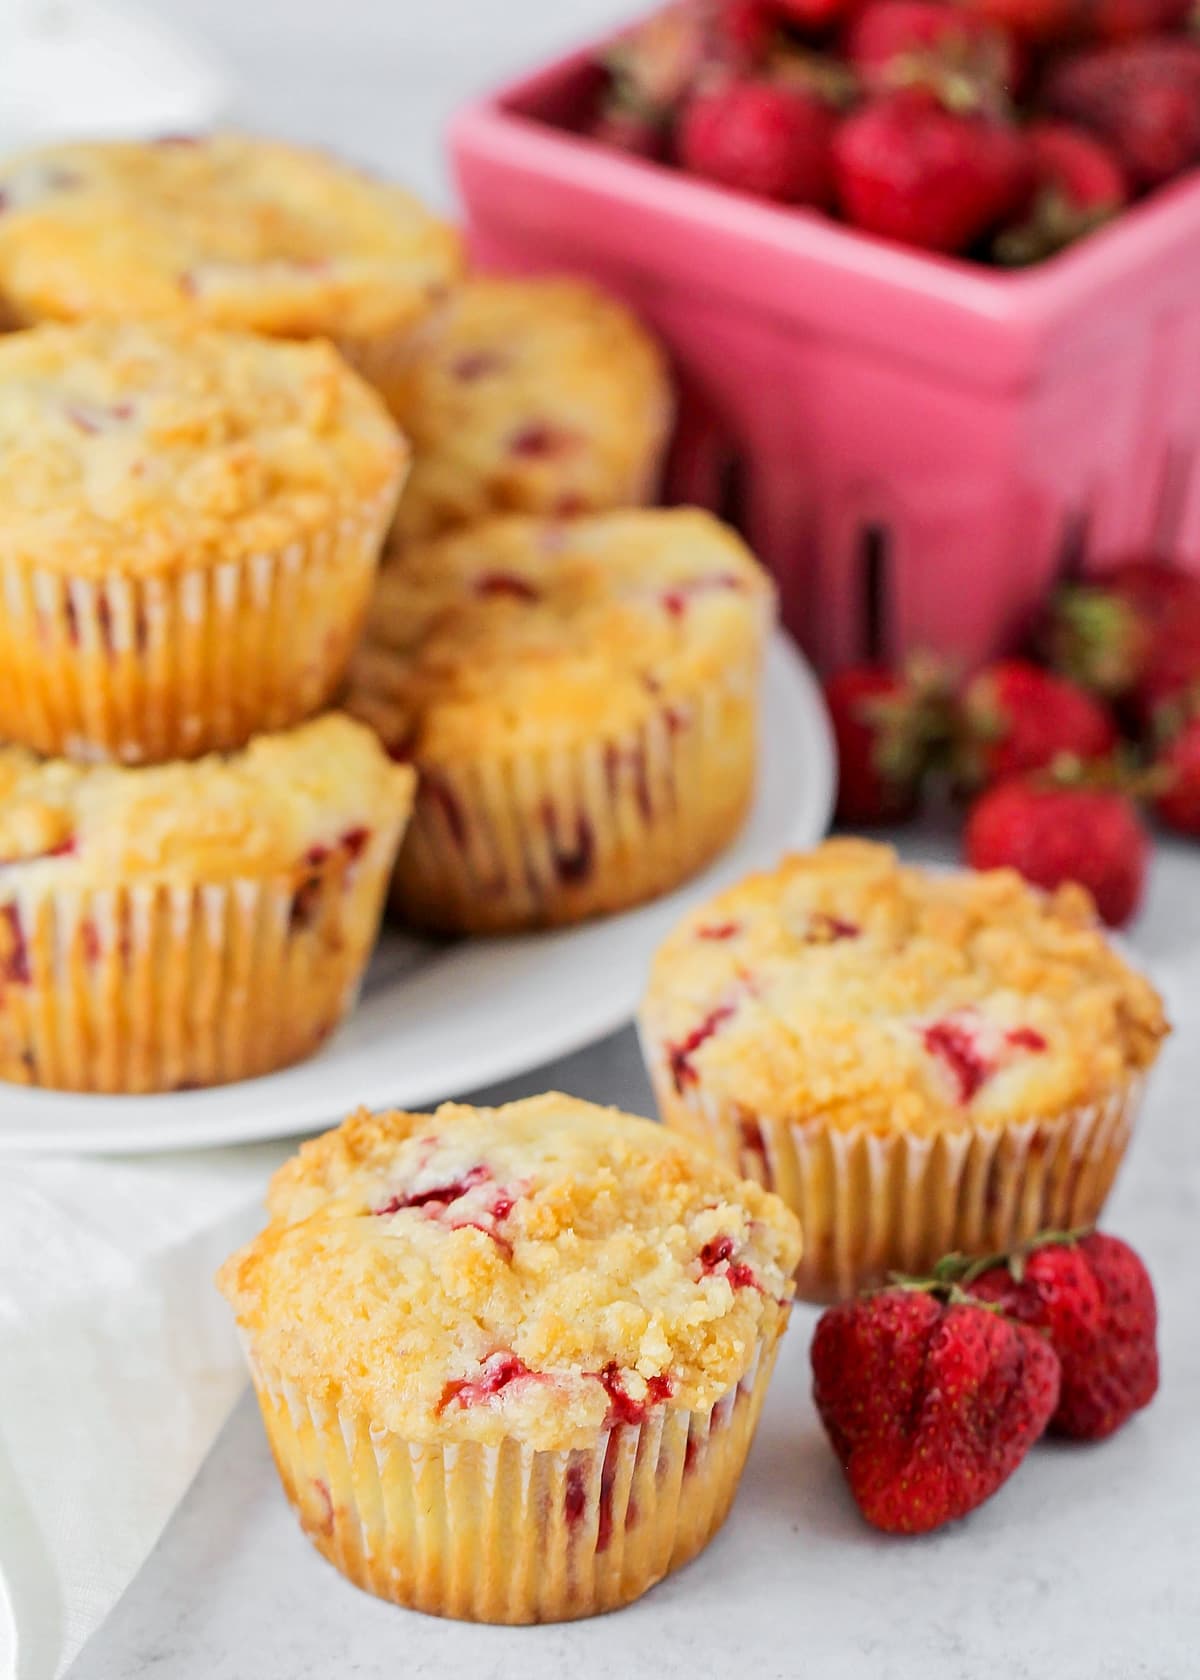 A plate of strawberry muffins with two sitting by fresh berries.